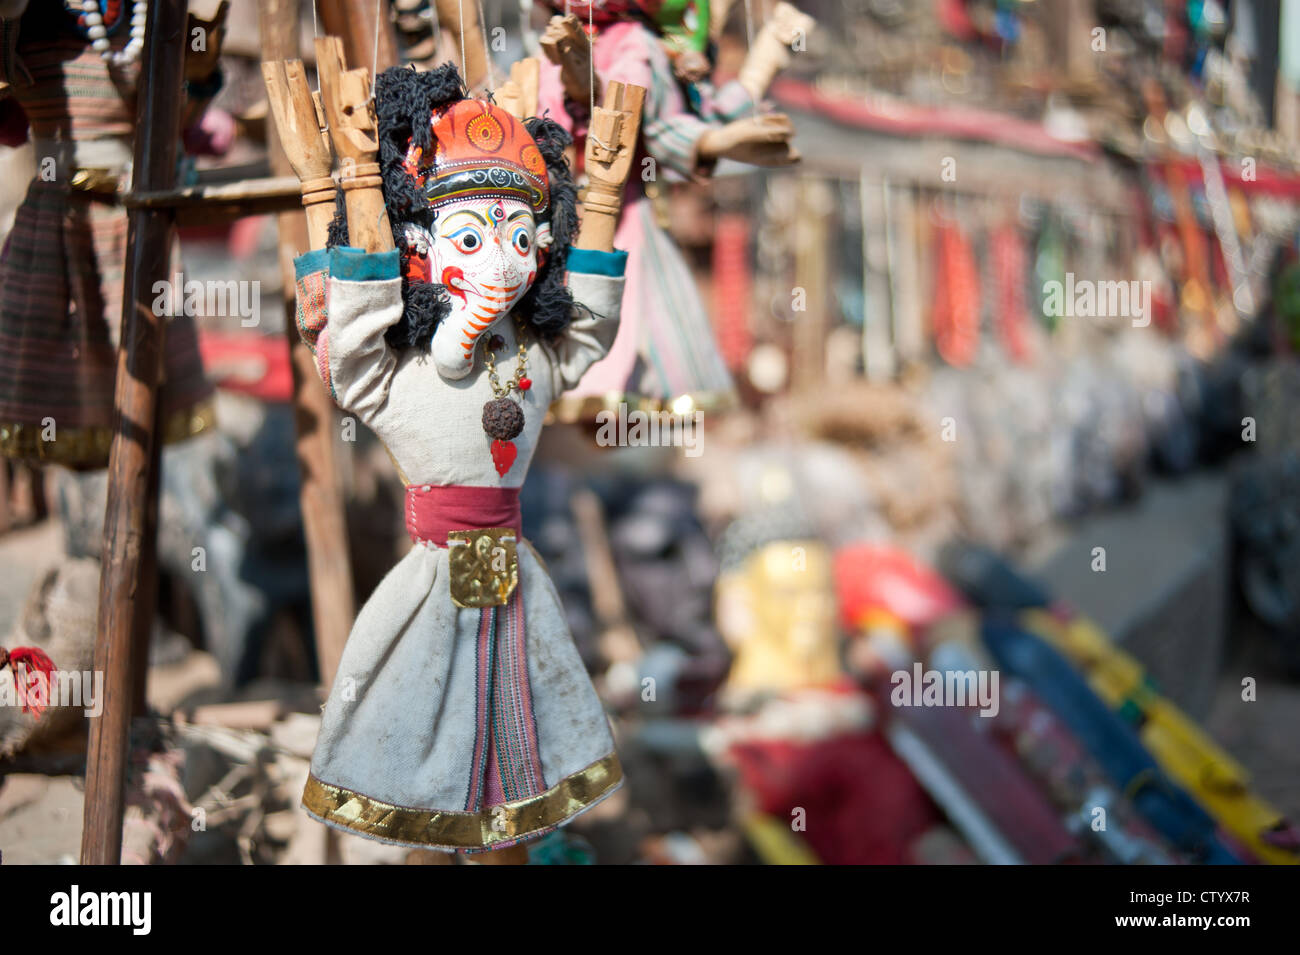 Masks, pottery,souvenirs, hanging in front of the shop, Bhaktapur, Nepal Stock Photo